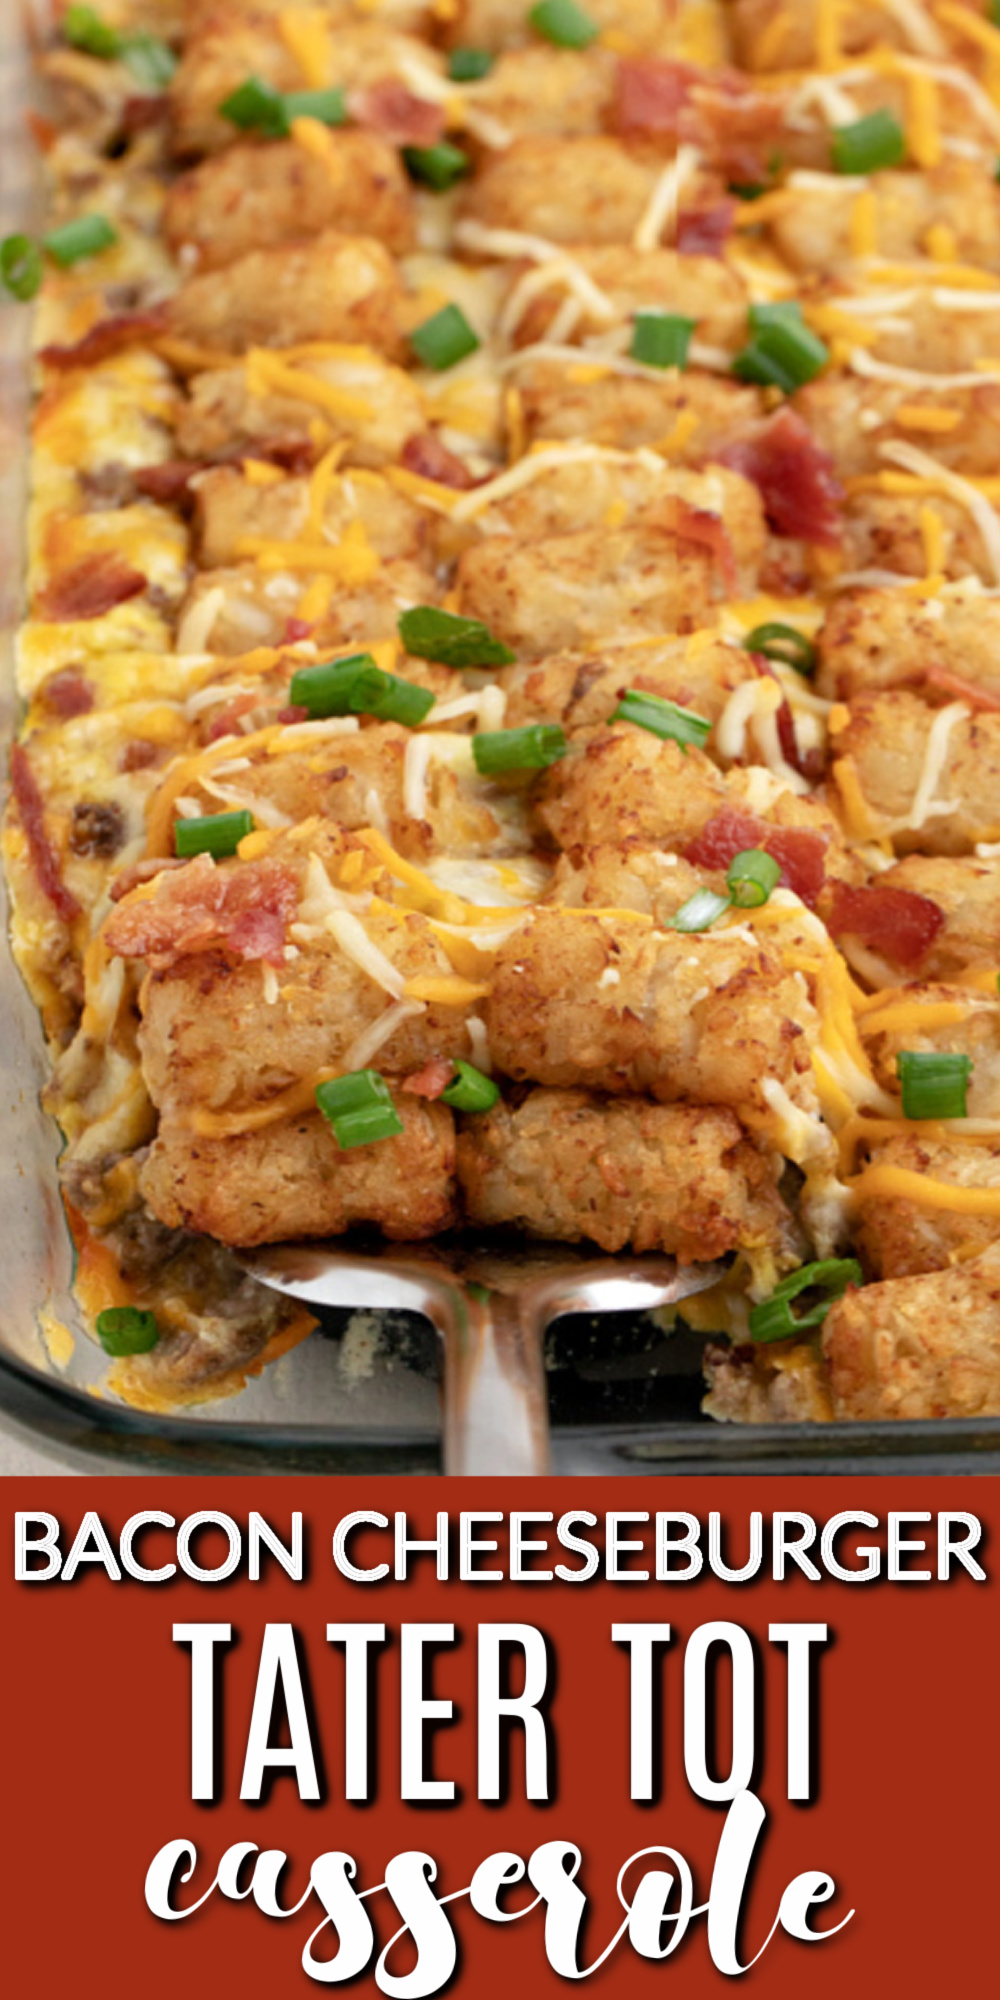 Bacon Cheeseburger Tater Tot Casserole is a HUGE hit and family favorite. Made with ground beef, corn, sour cream, tater tots, cheese, seasonings, and more. It's a hearty dish full of flavor the whole family will love.